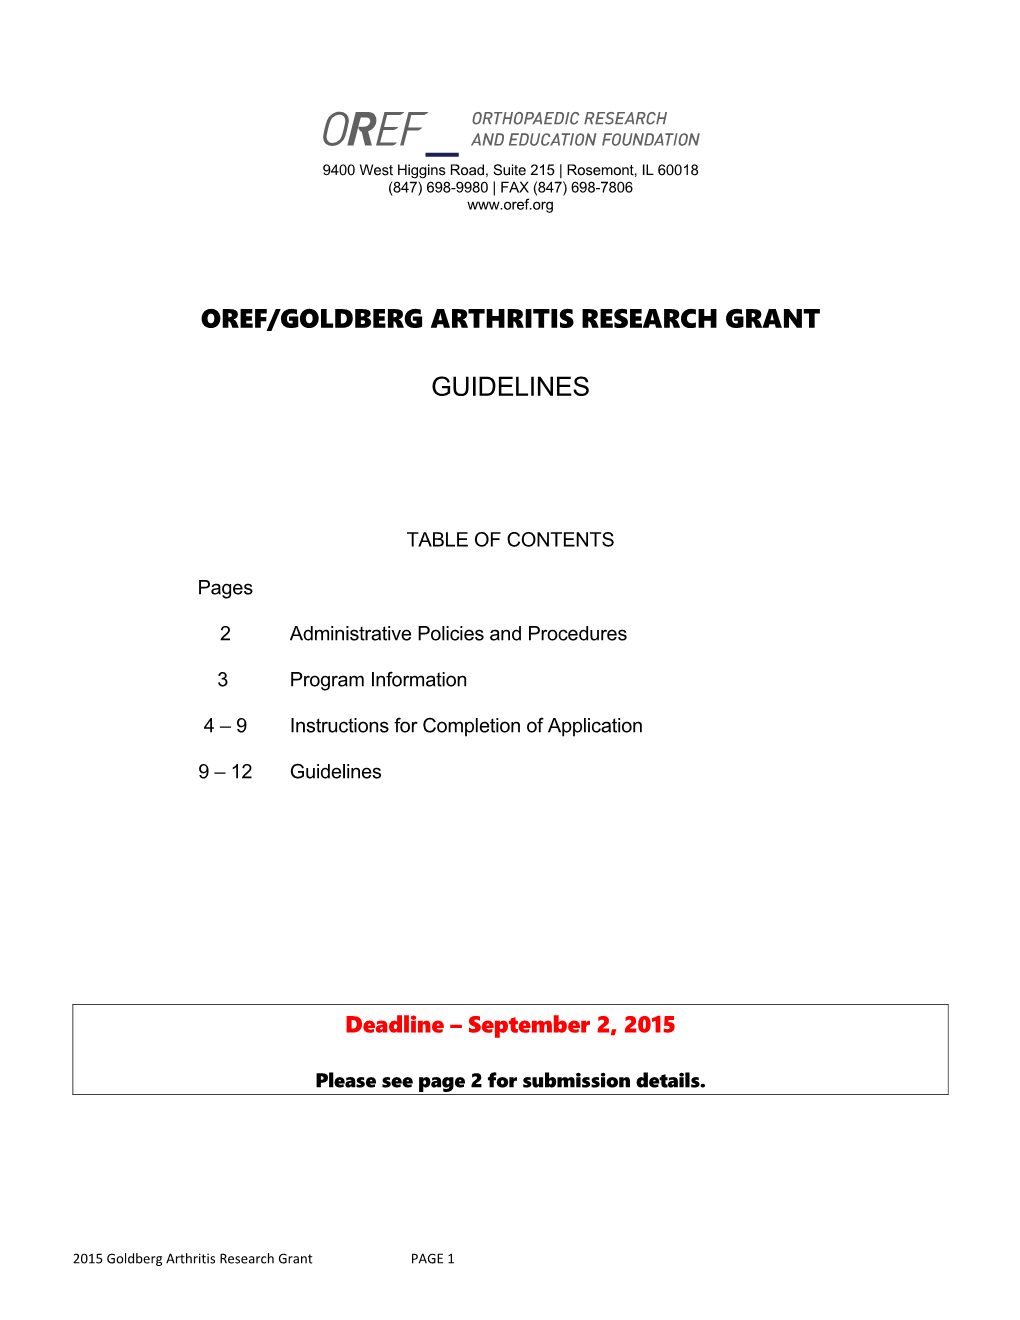 Research Grant Application This Grant Application Is A